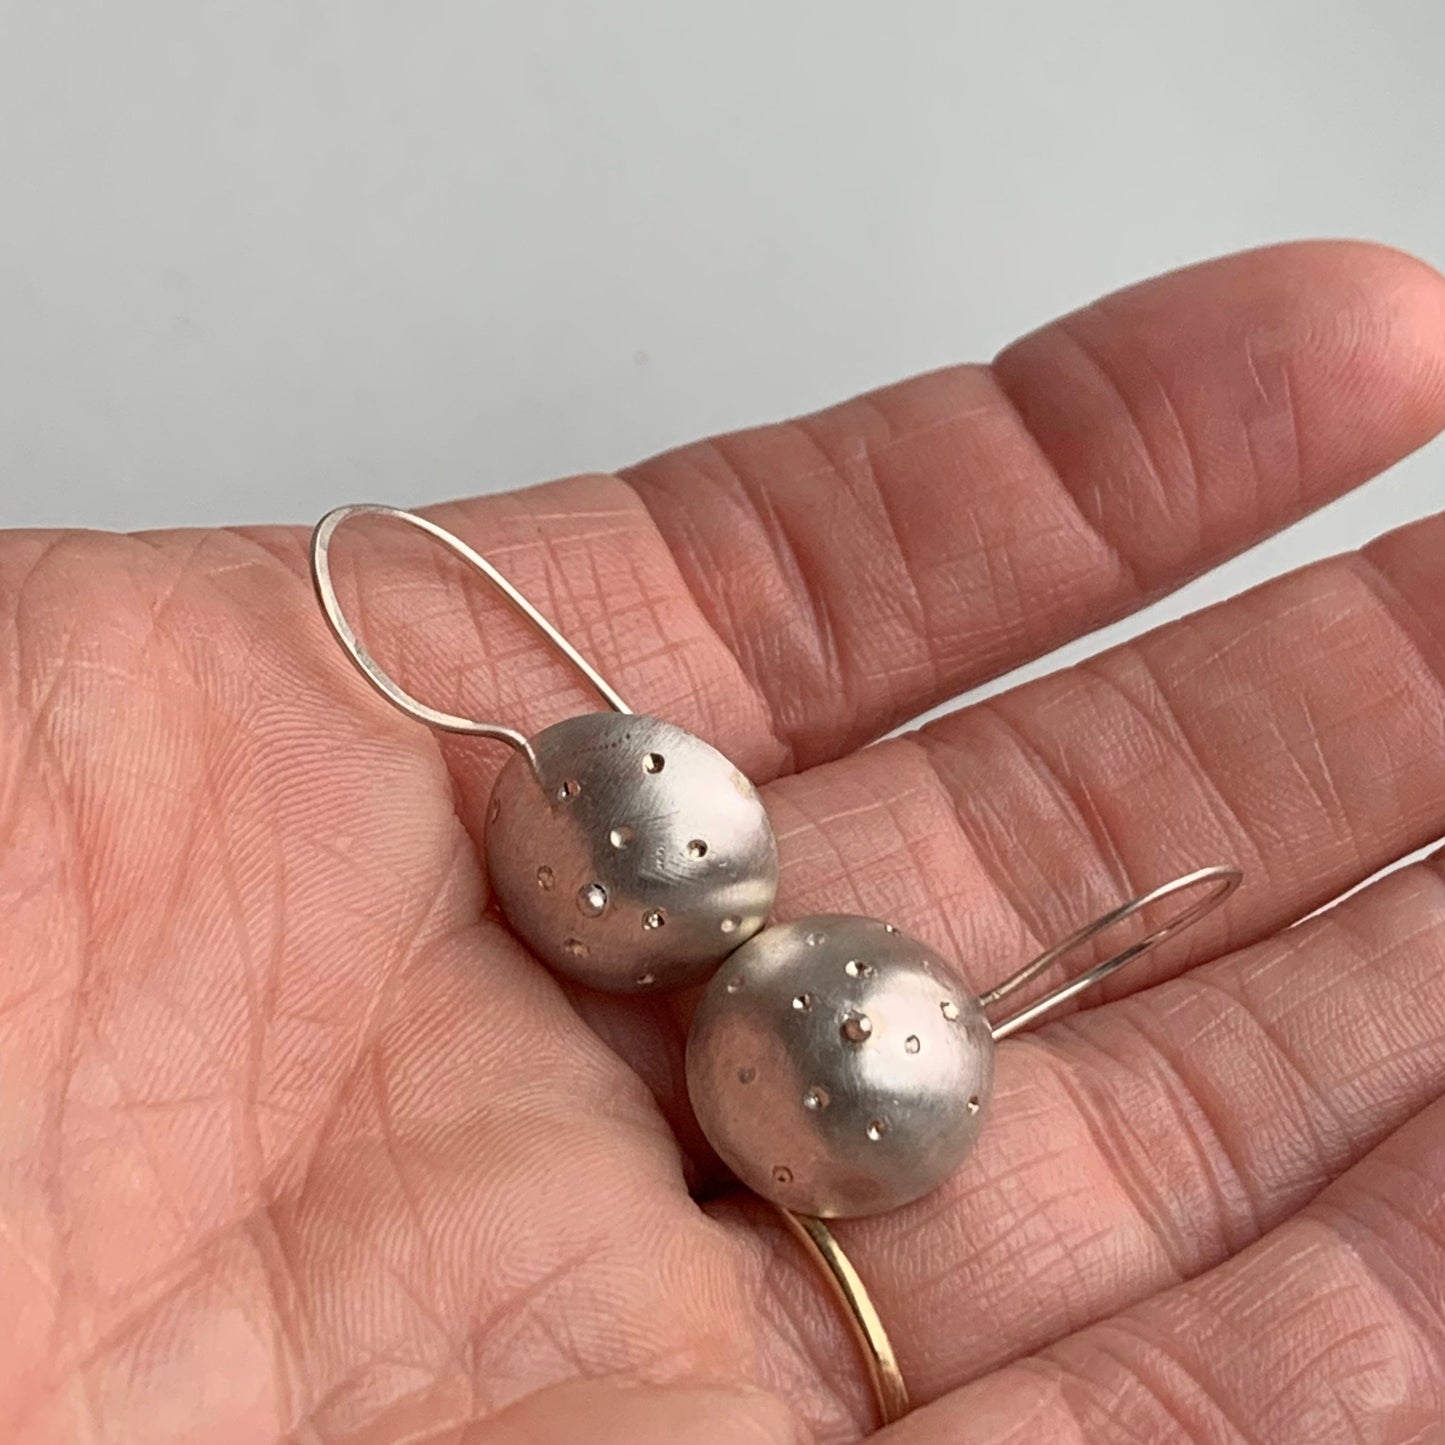 Everyday silver earrings - classic drop style - handmade sterling jewelry for women - small statement earrings - one of a kind